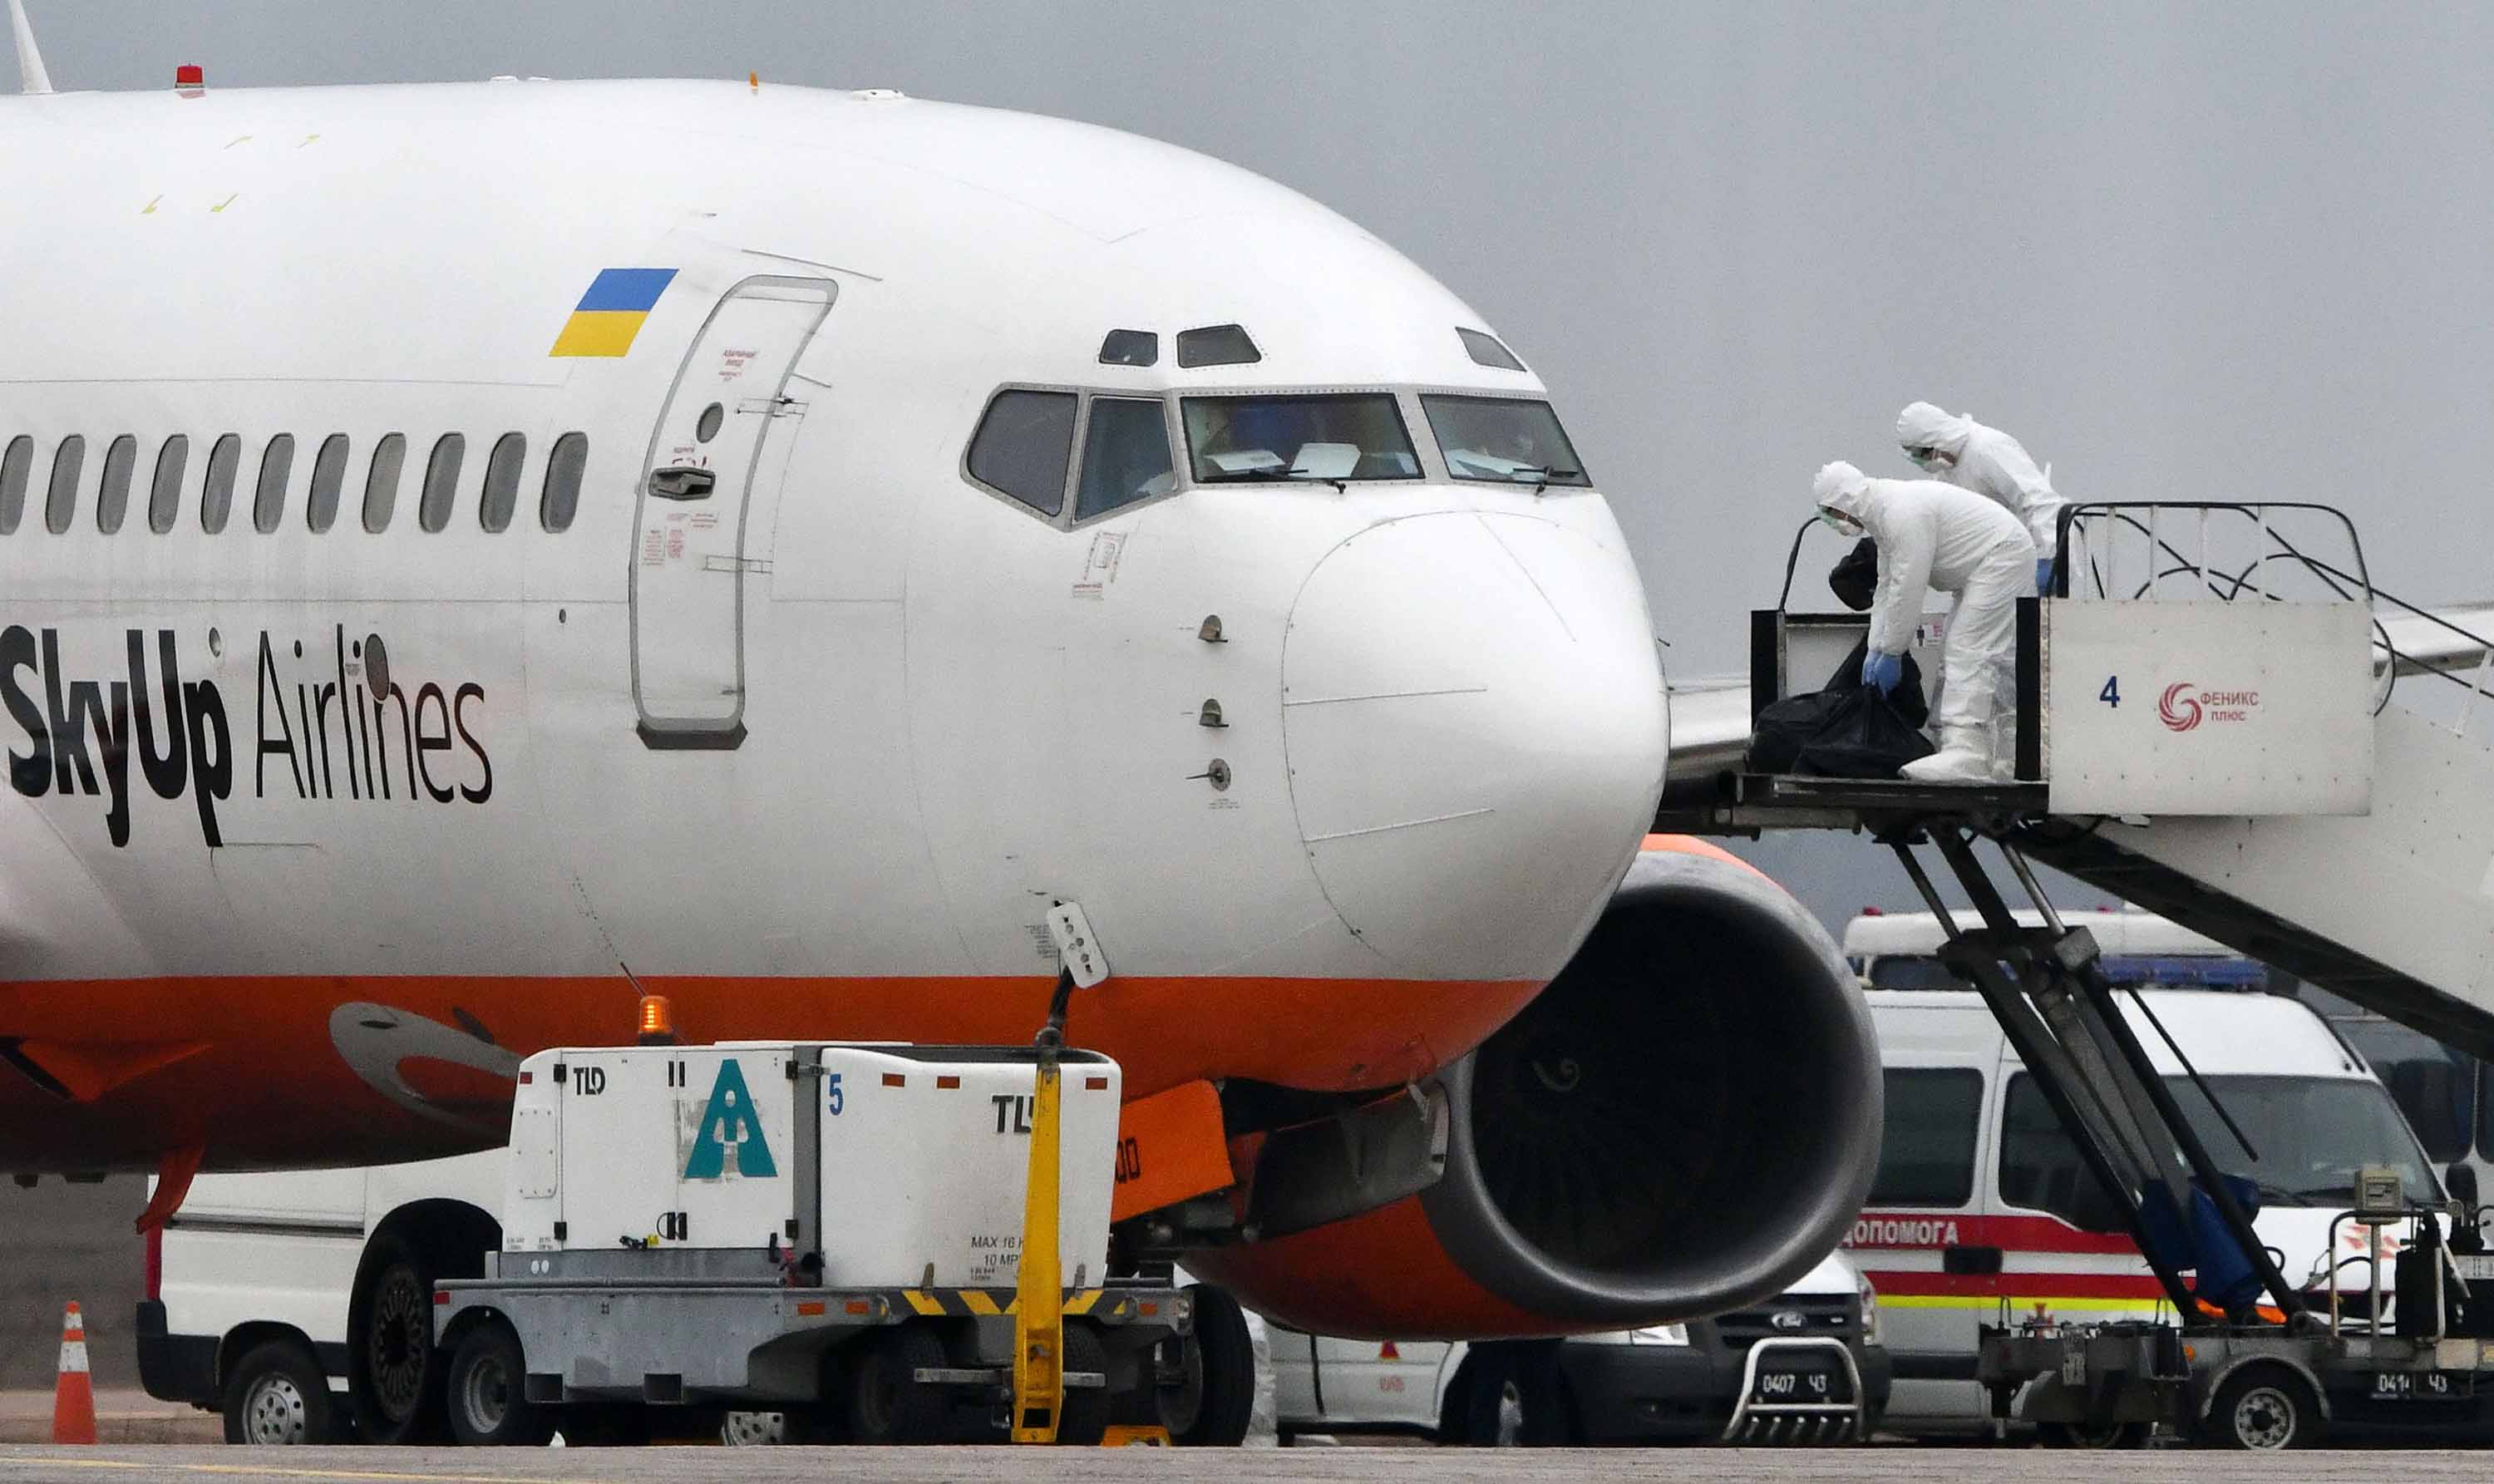 Airport crew members check the fuselage of a SkyUp Airlines plane during a refueling stopover at Kiev's Boryspil International Airport in Ukraine, following the evacuation of Ukrainians and foreign nationals from the Chinese city of Wuhan on Thursday.